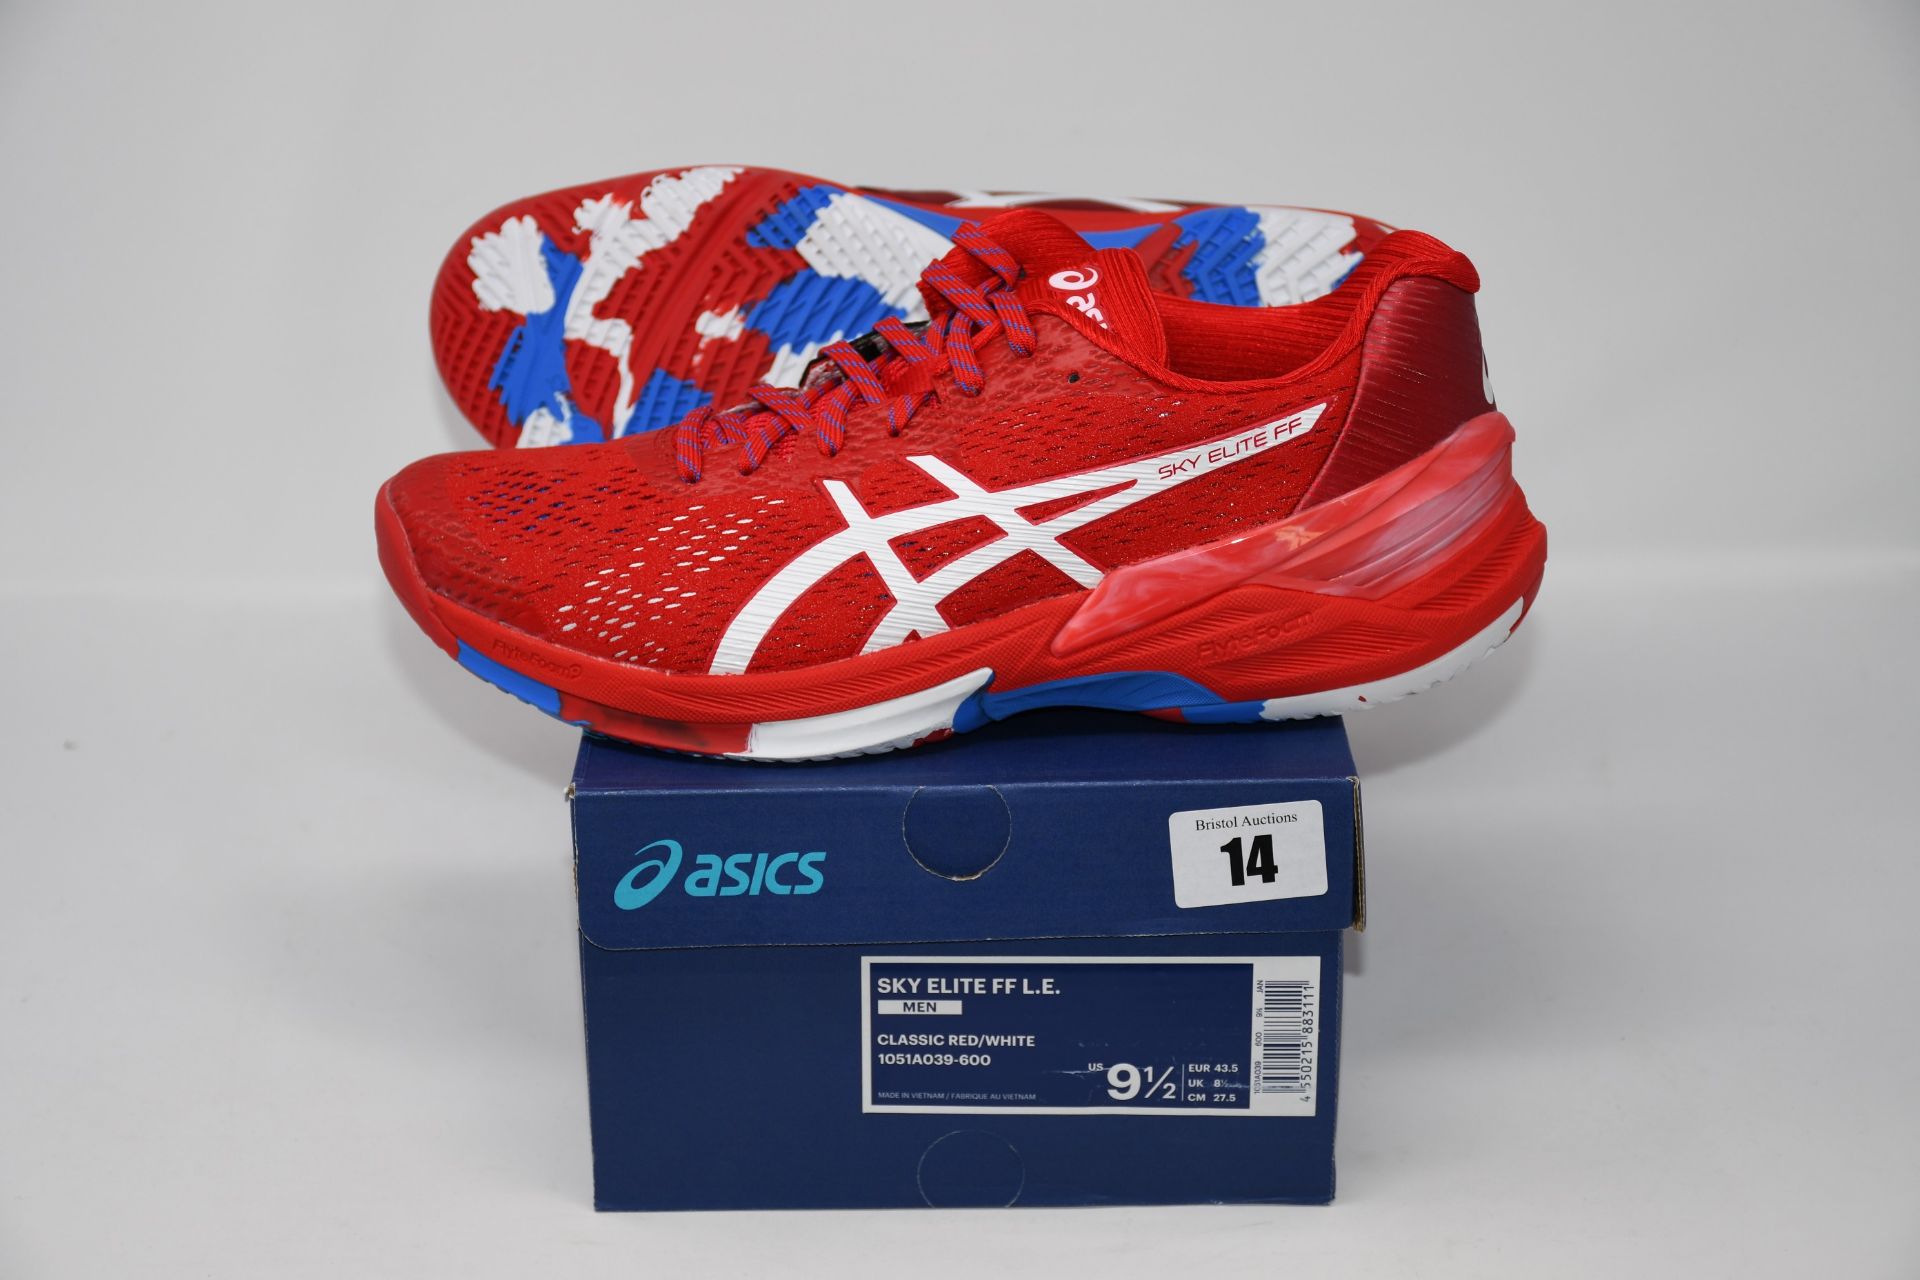 One pair of man's boxed as new Asics Sky Elite FF L.E trainers in classic red and white (UK 8.5).